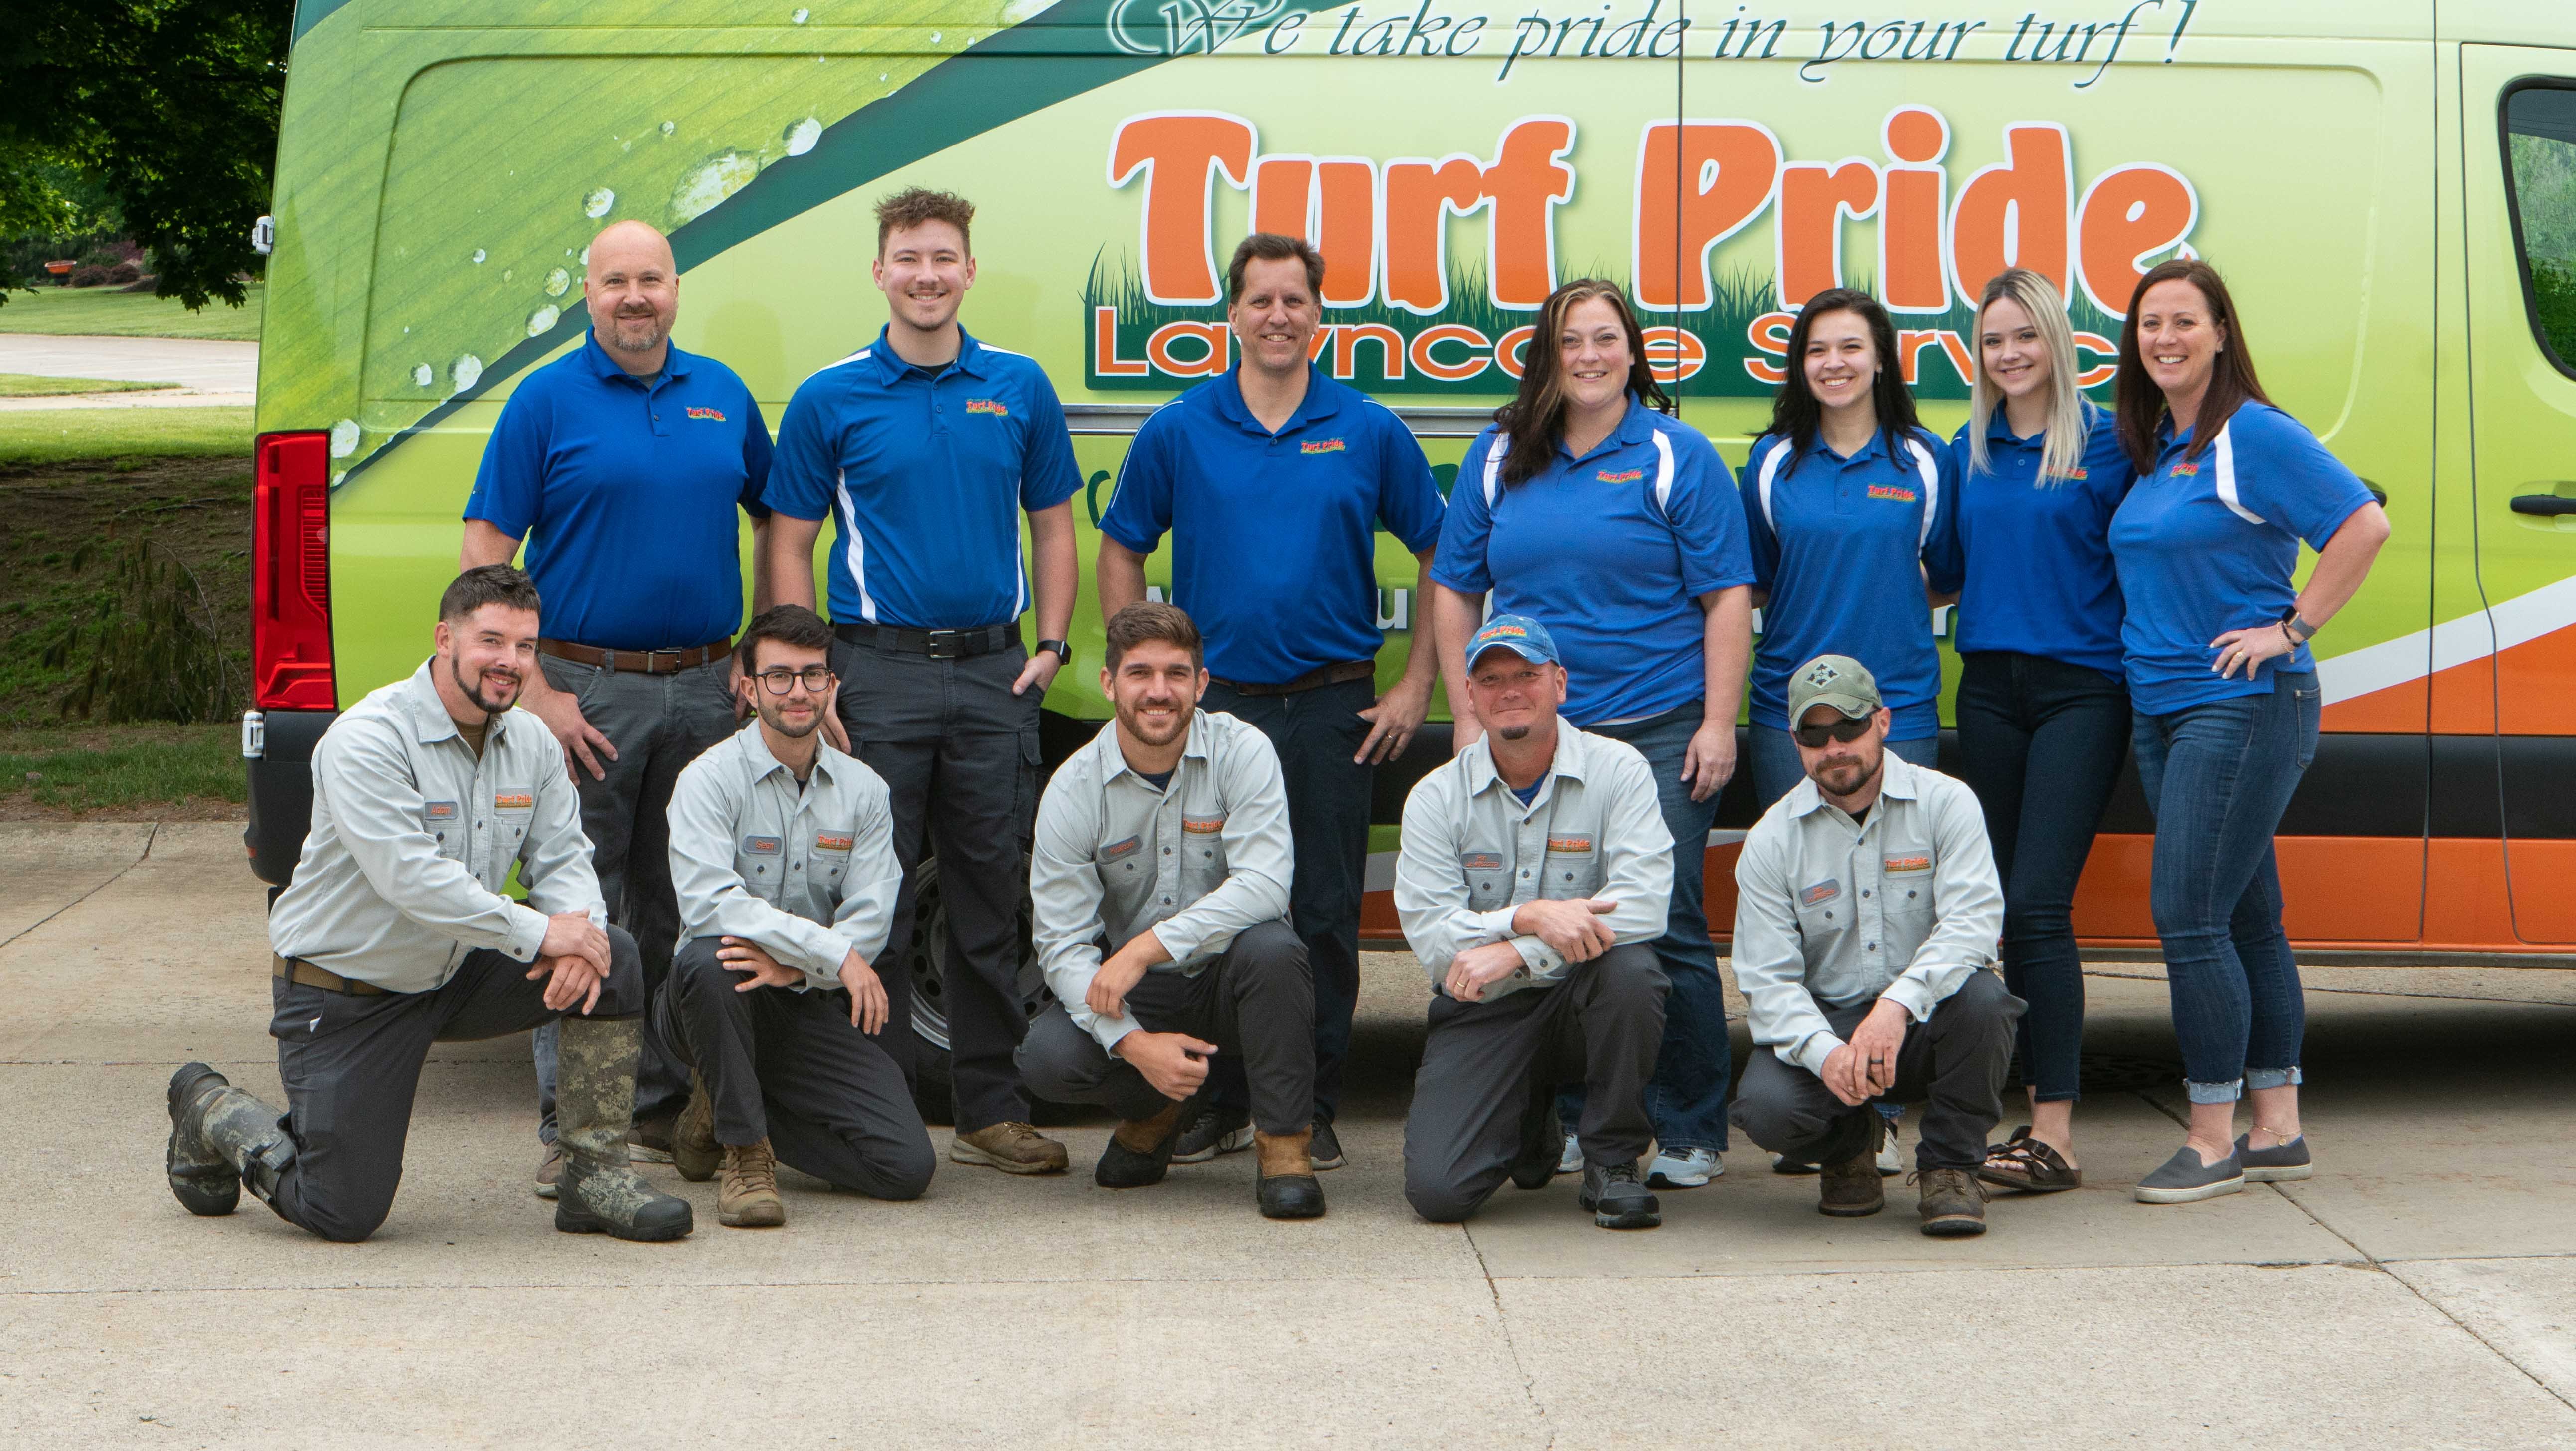 Turf pride team photo in front of truck